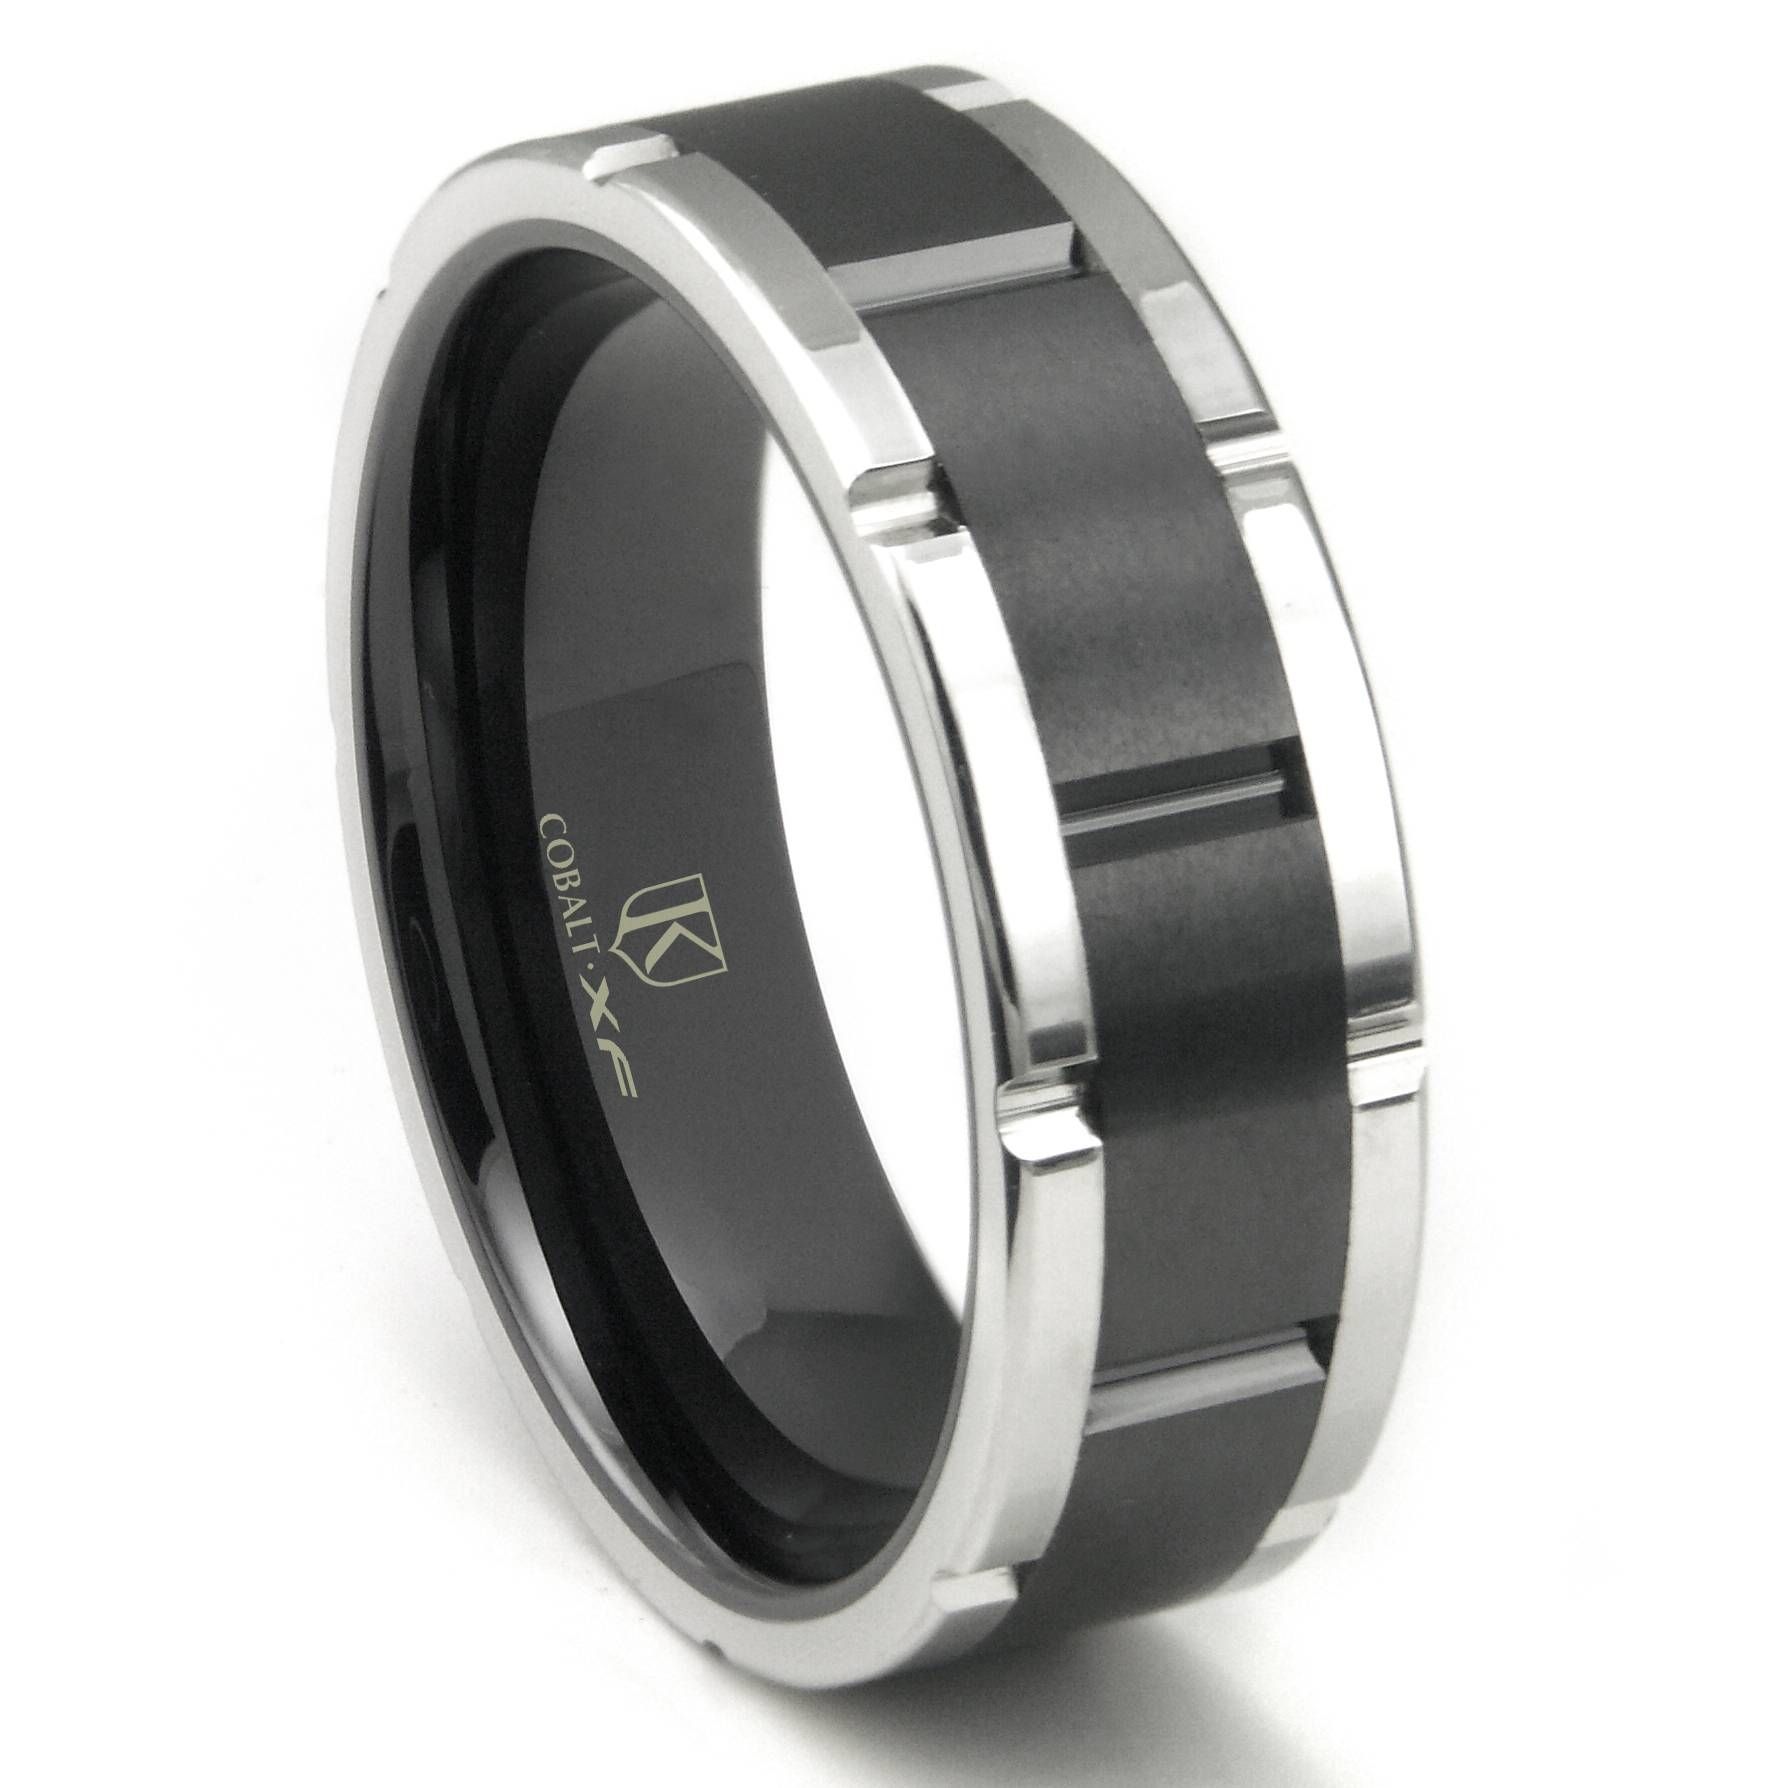 Cobalt Xf Chrome 8mm Two Tone Matte Finish Center Wedding Band Ring With Matte Black Wedding Bands (View 5 of 15)